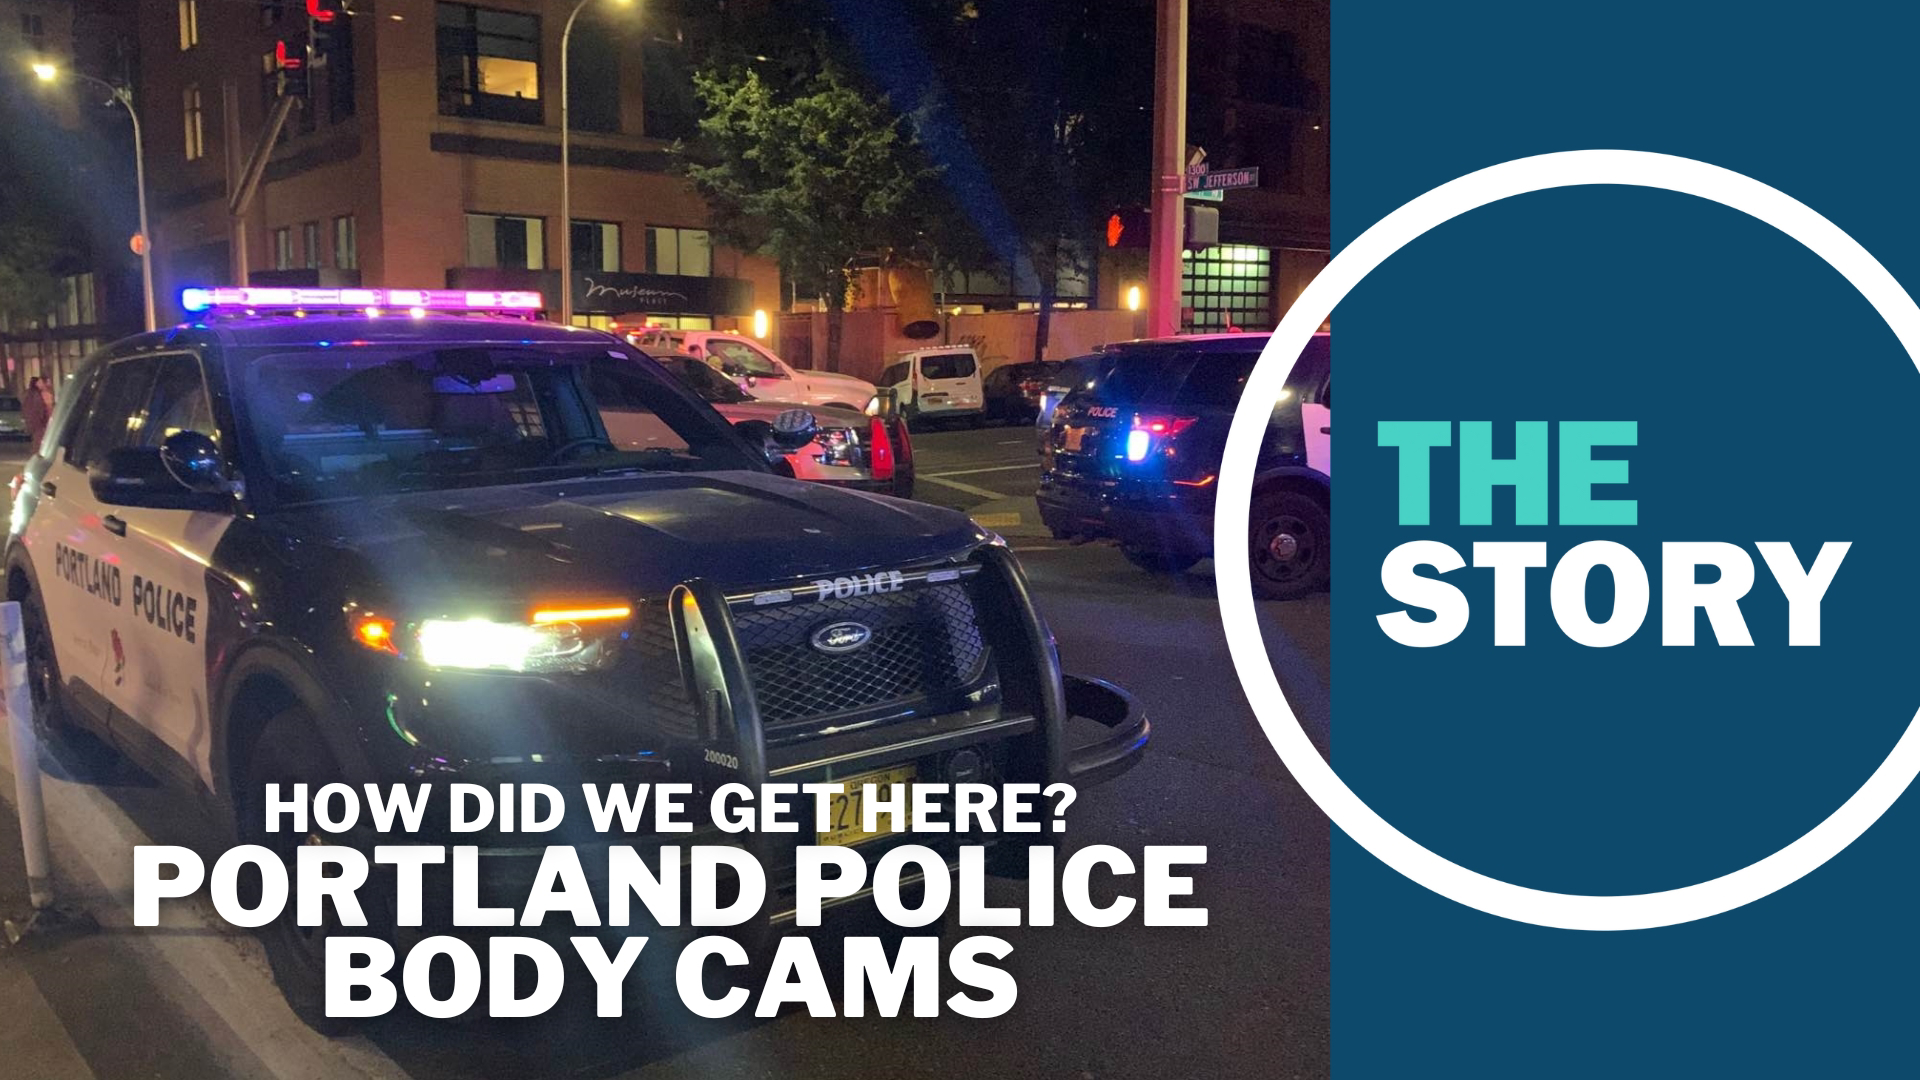 For years, Portland officials have been kicking around the idea of getting body cams for police. But it still hasn’t happened.